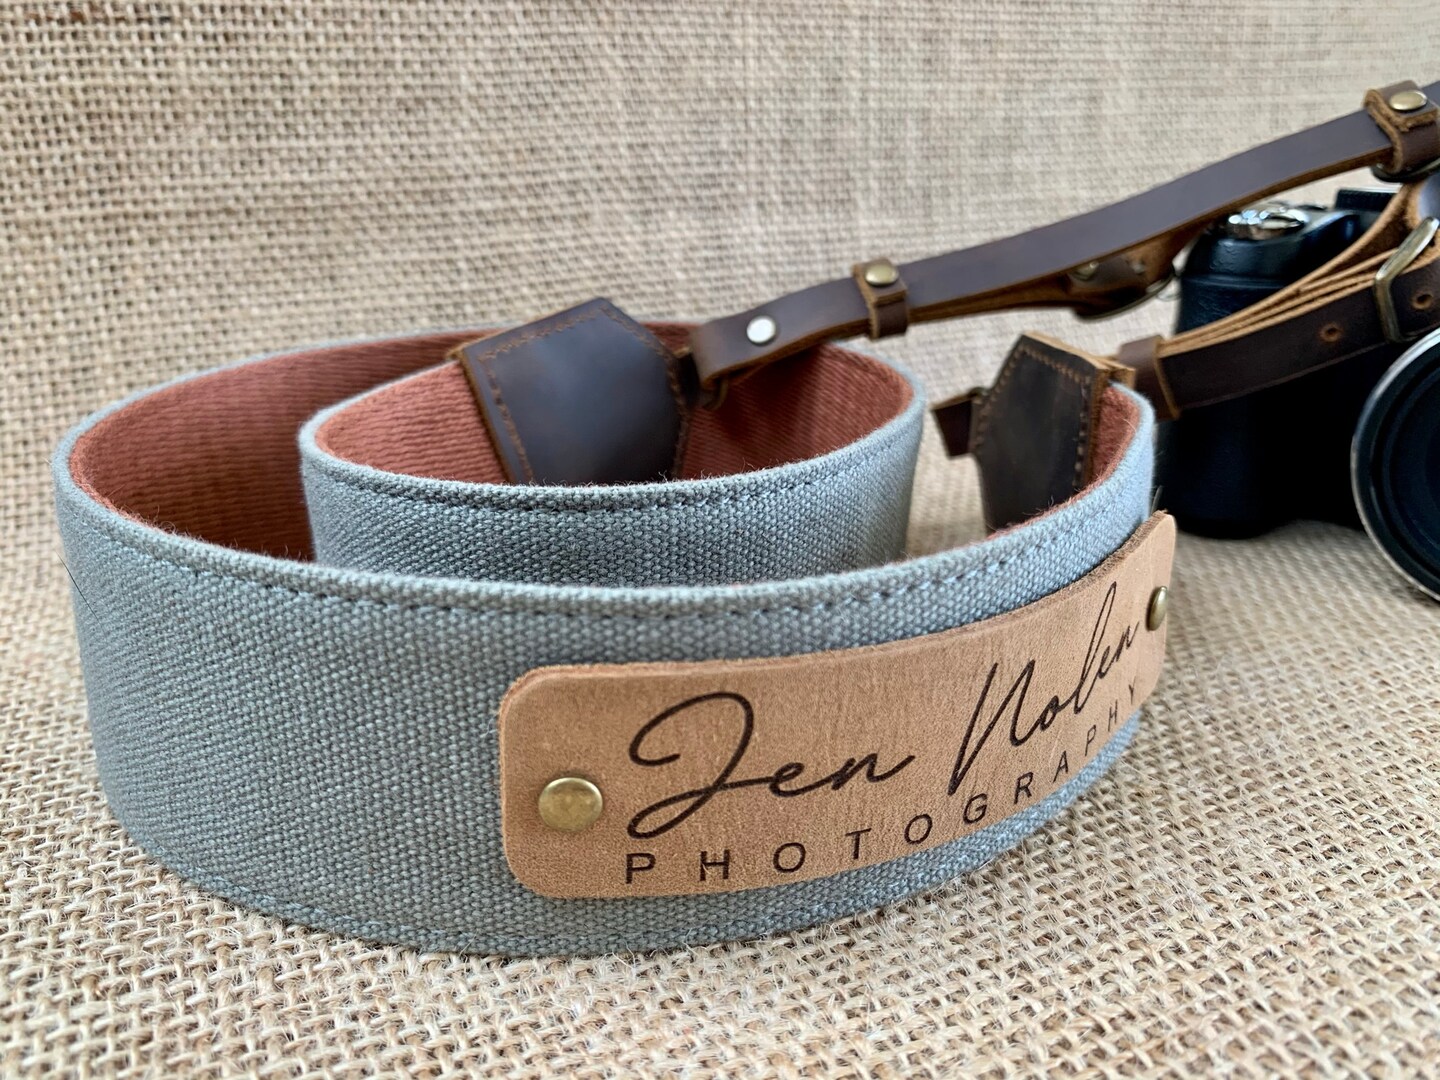 Personalized camera straps with stiching